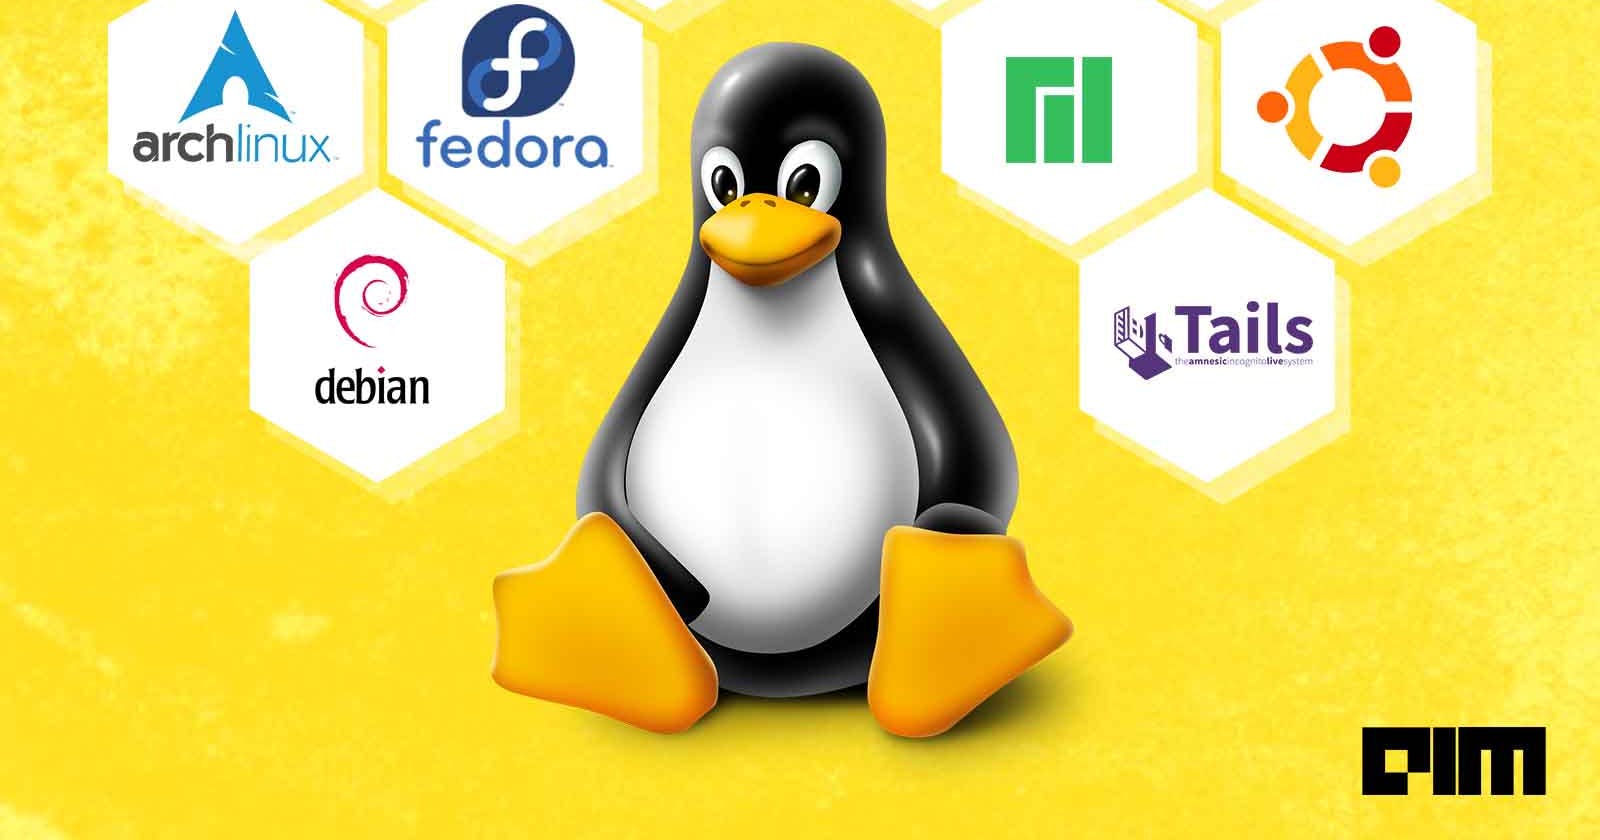 Linux - Basic commands and structure